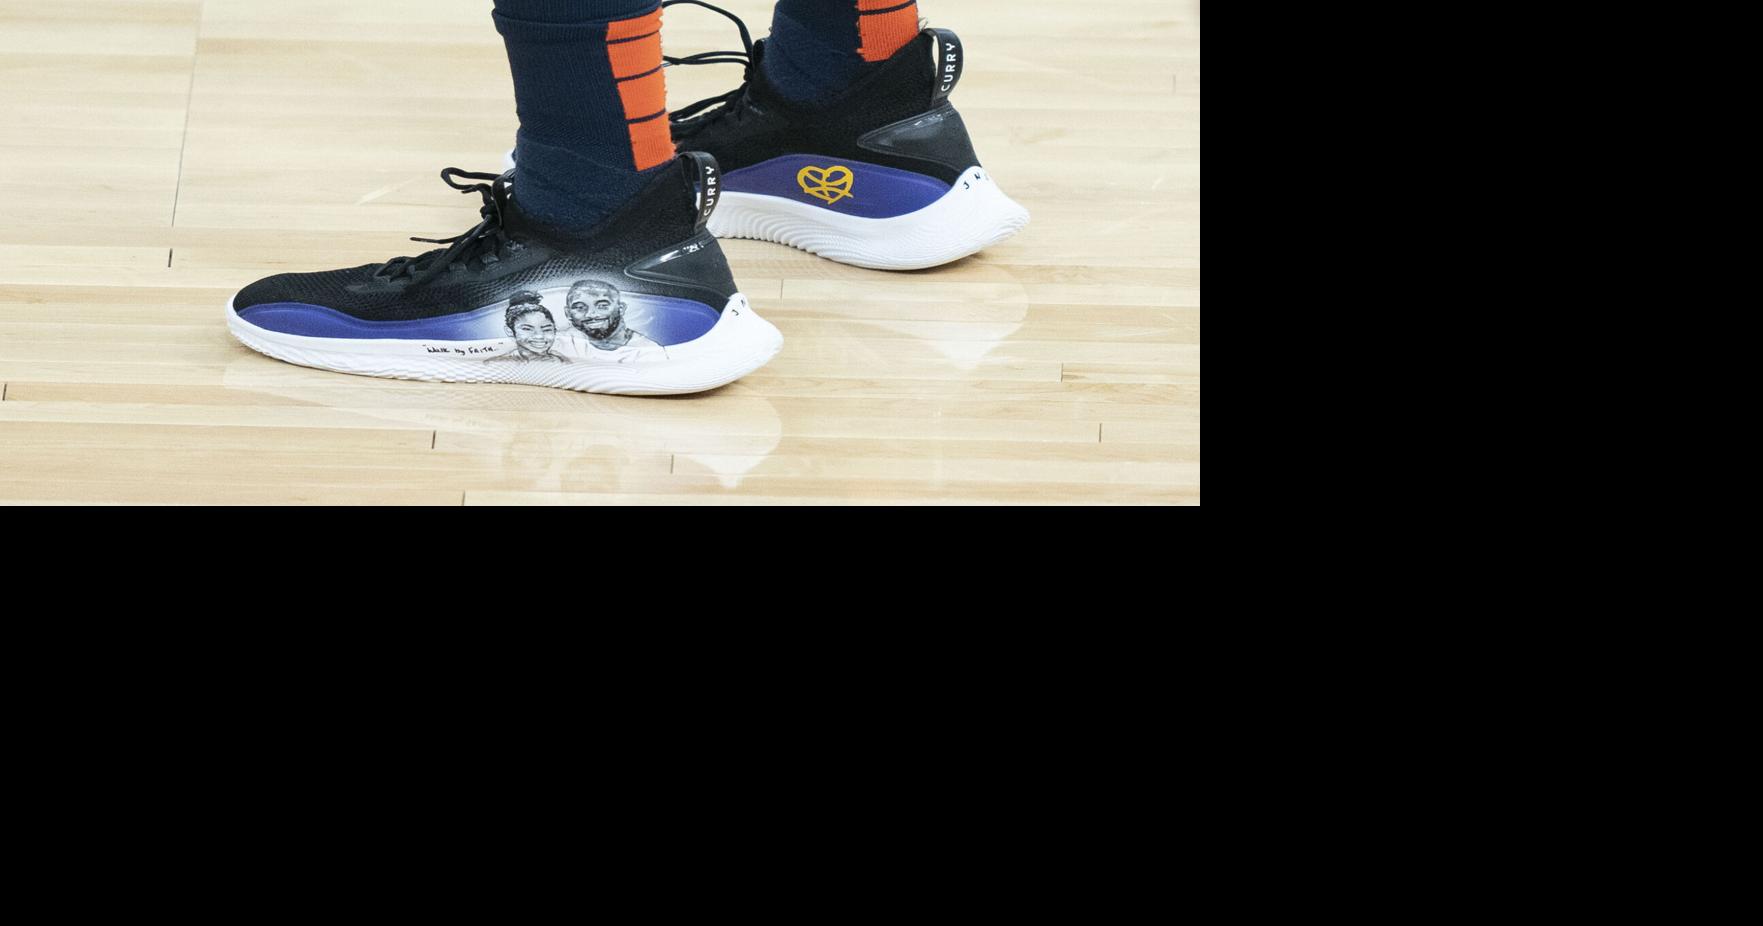 A detail view of the shoes worn by Minnesota Timberwolves center